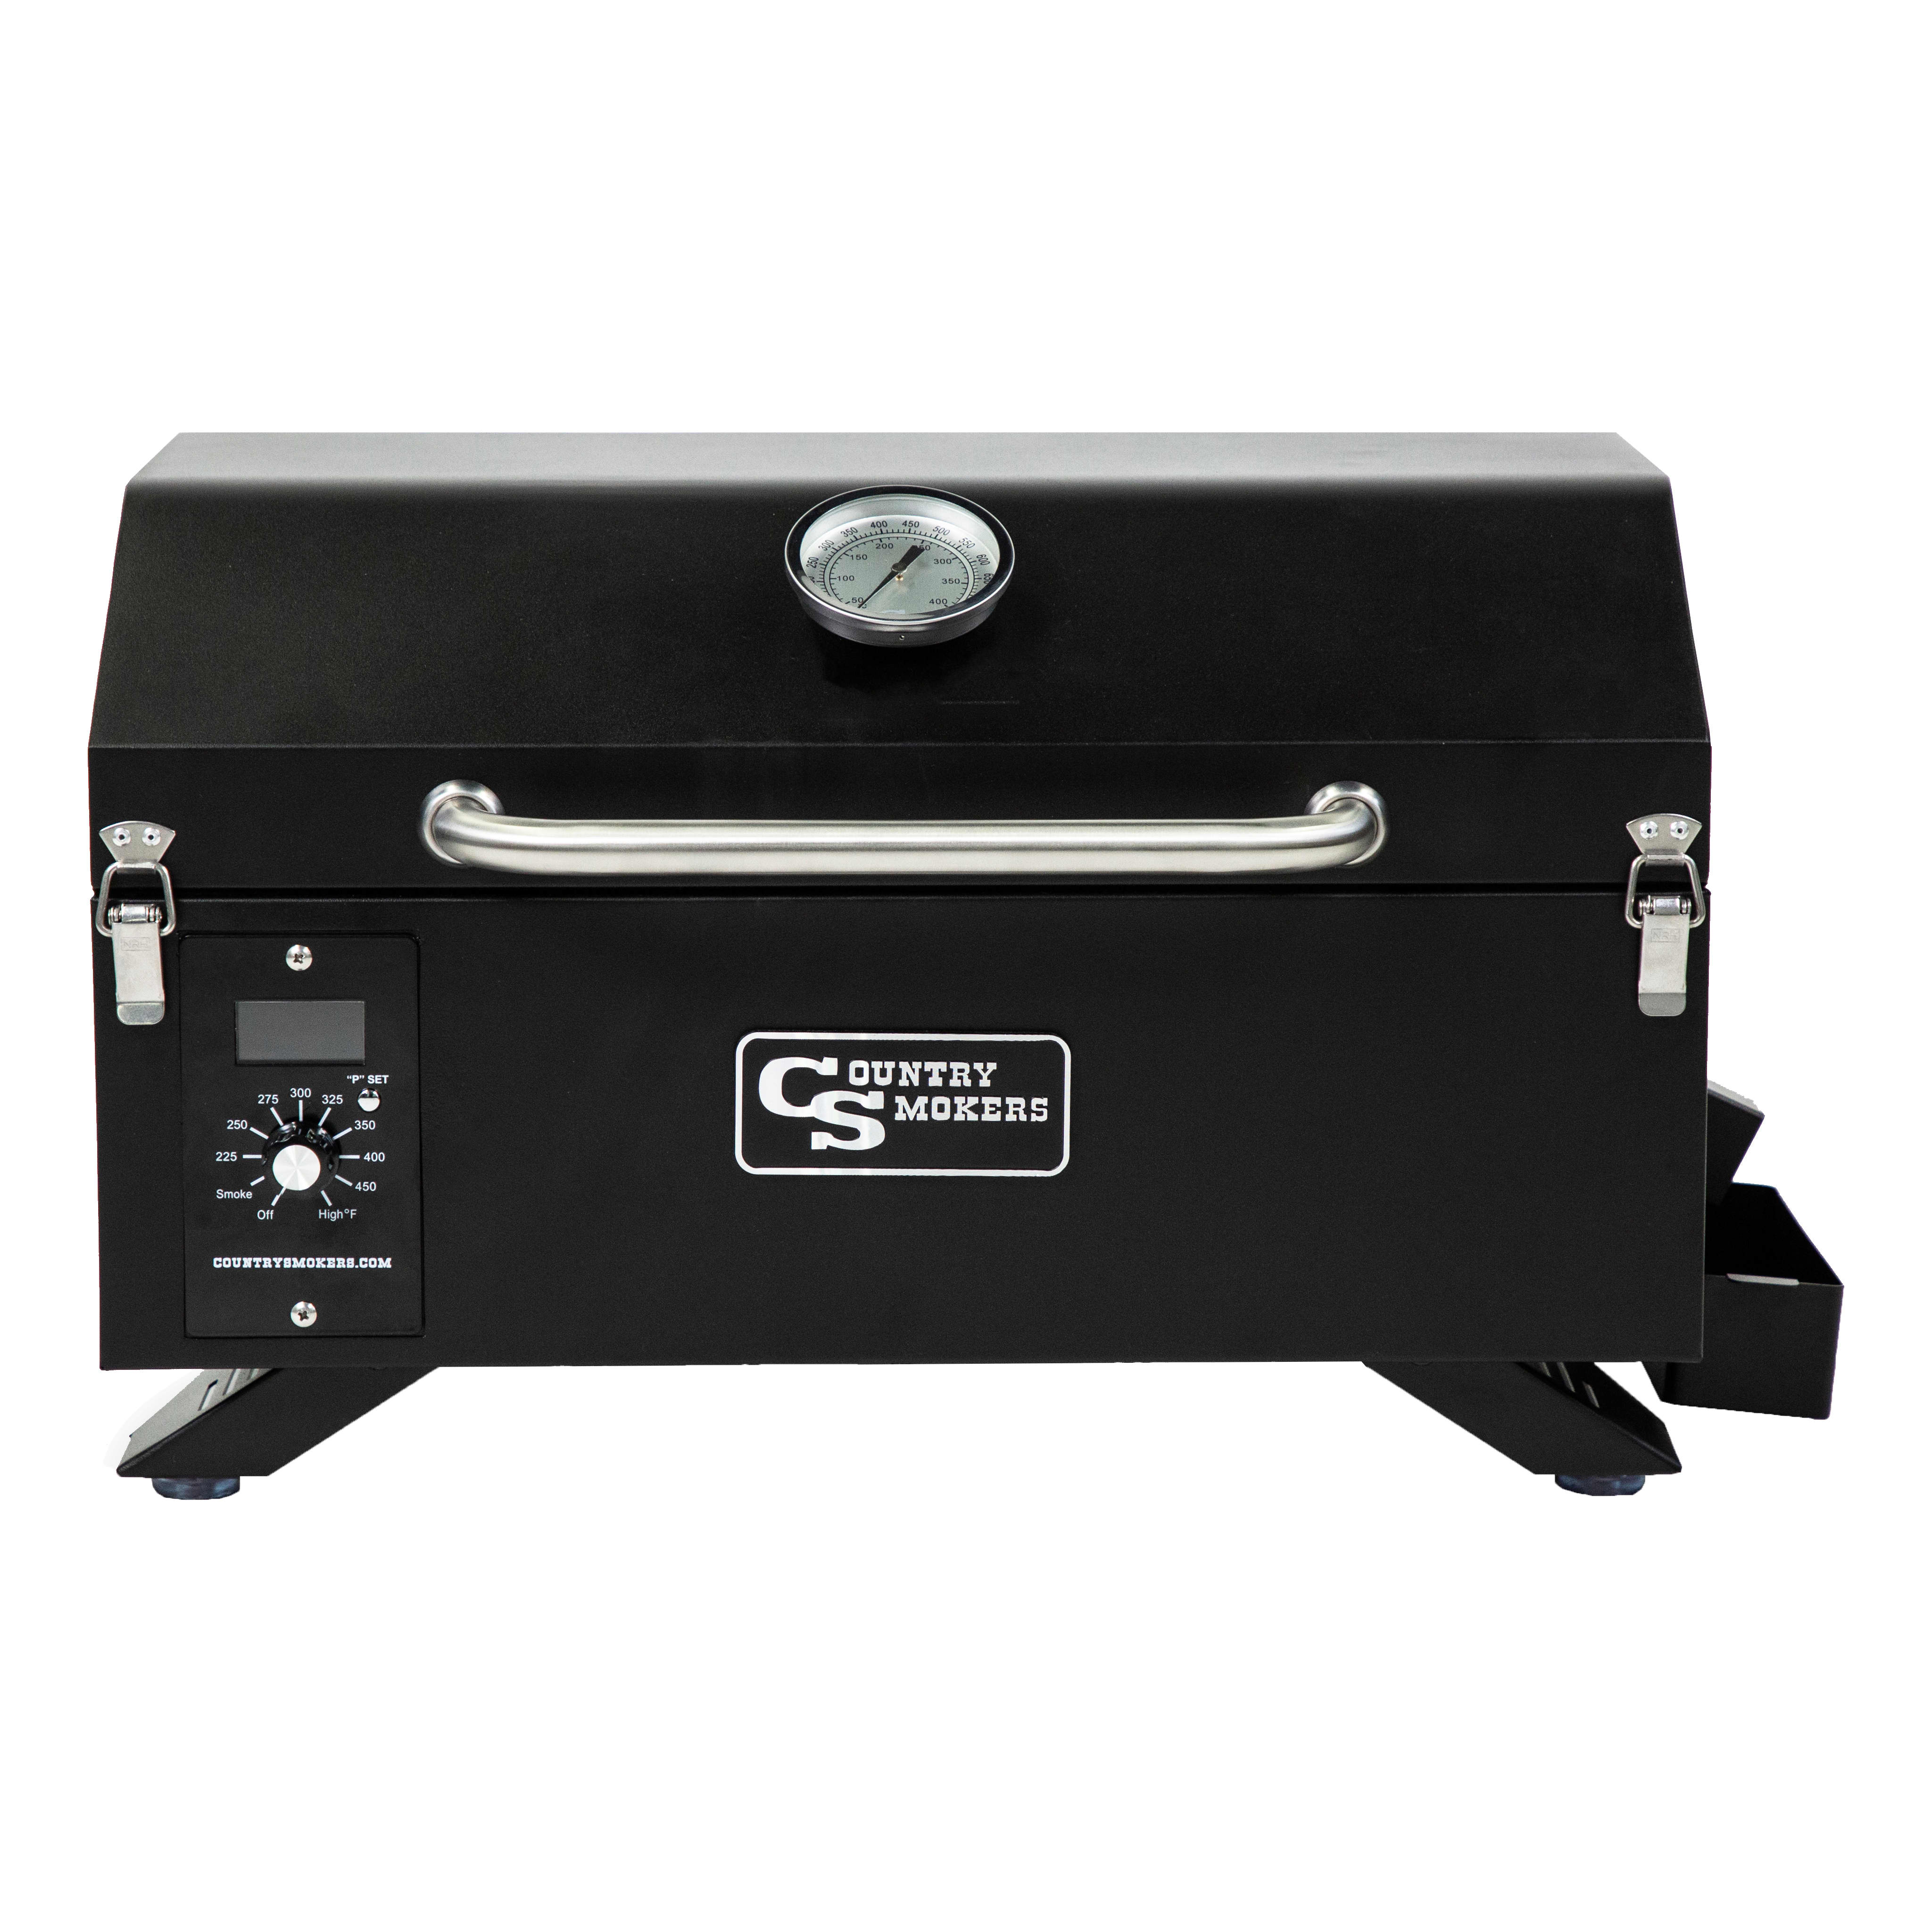 Country Smokers Traveler Portable Wood Pellet Grill & Smoker